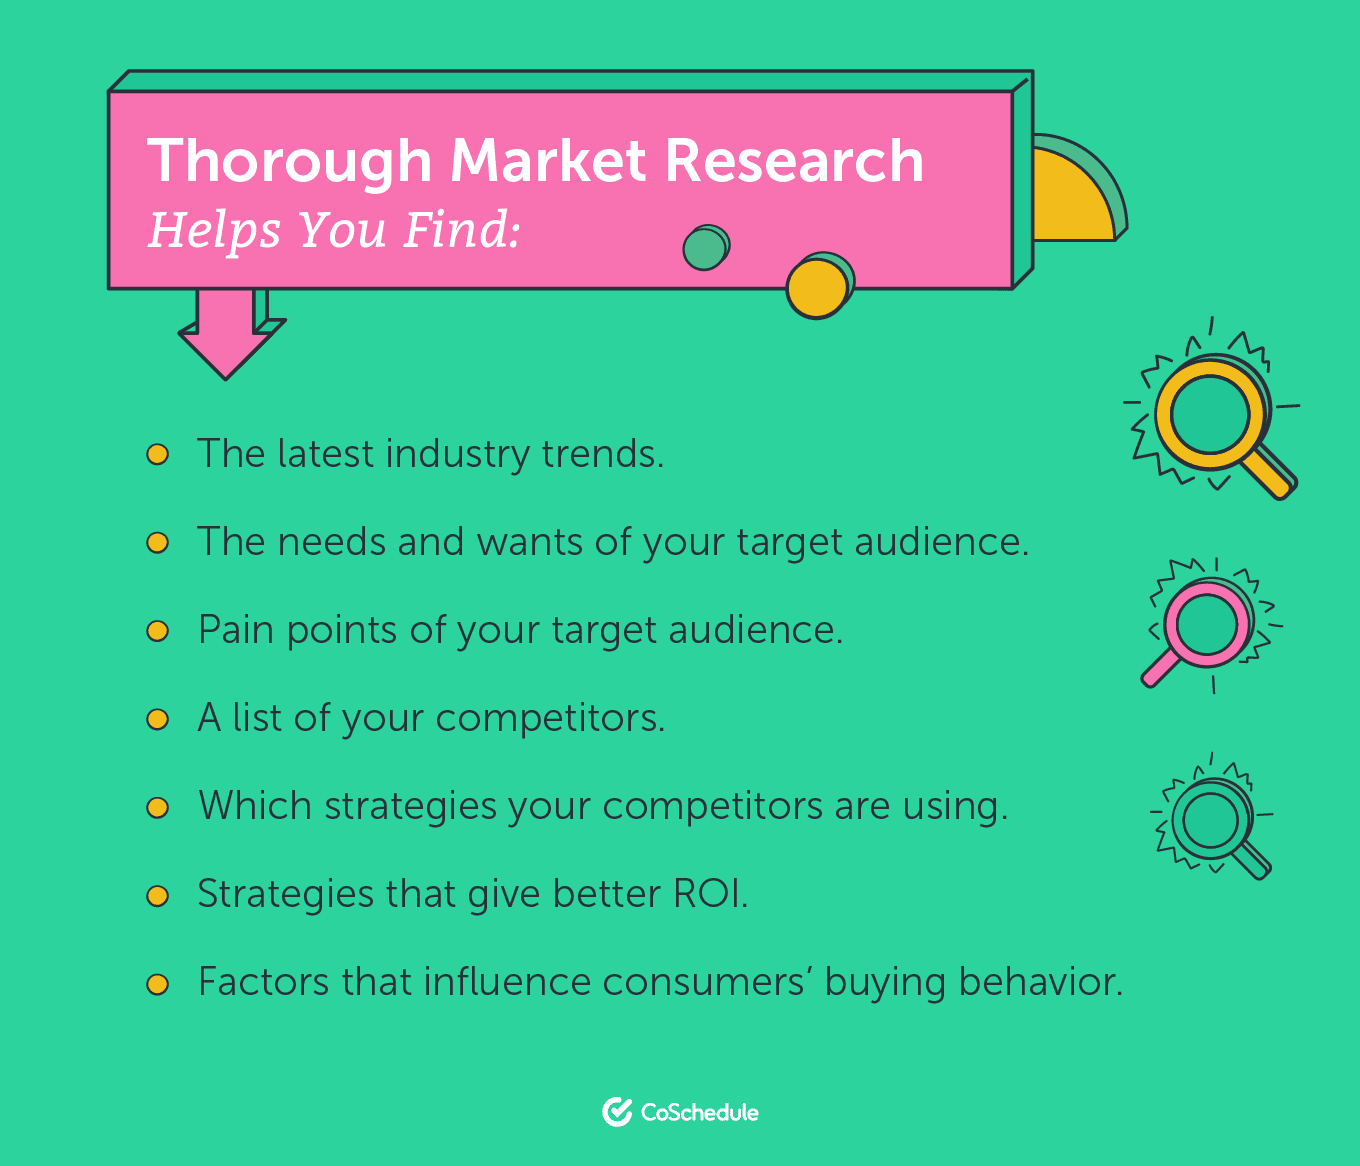 What market research helps with